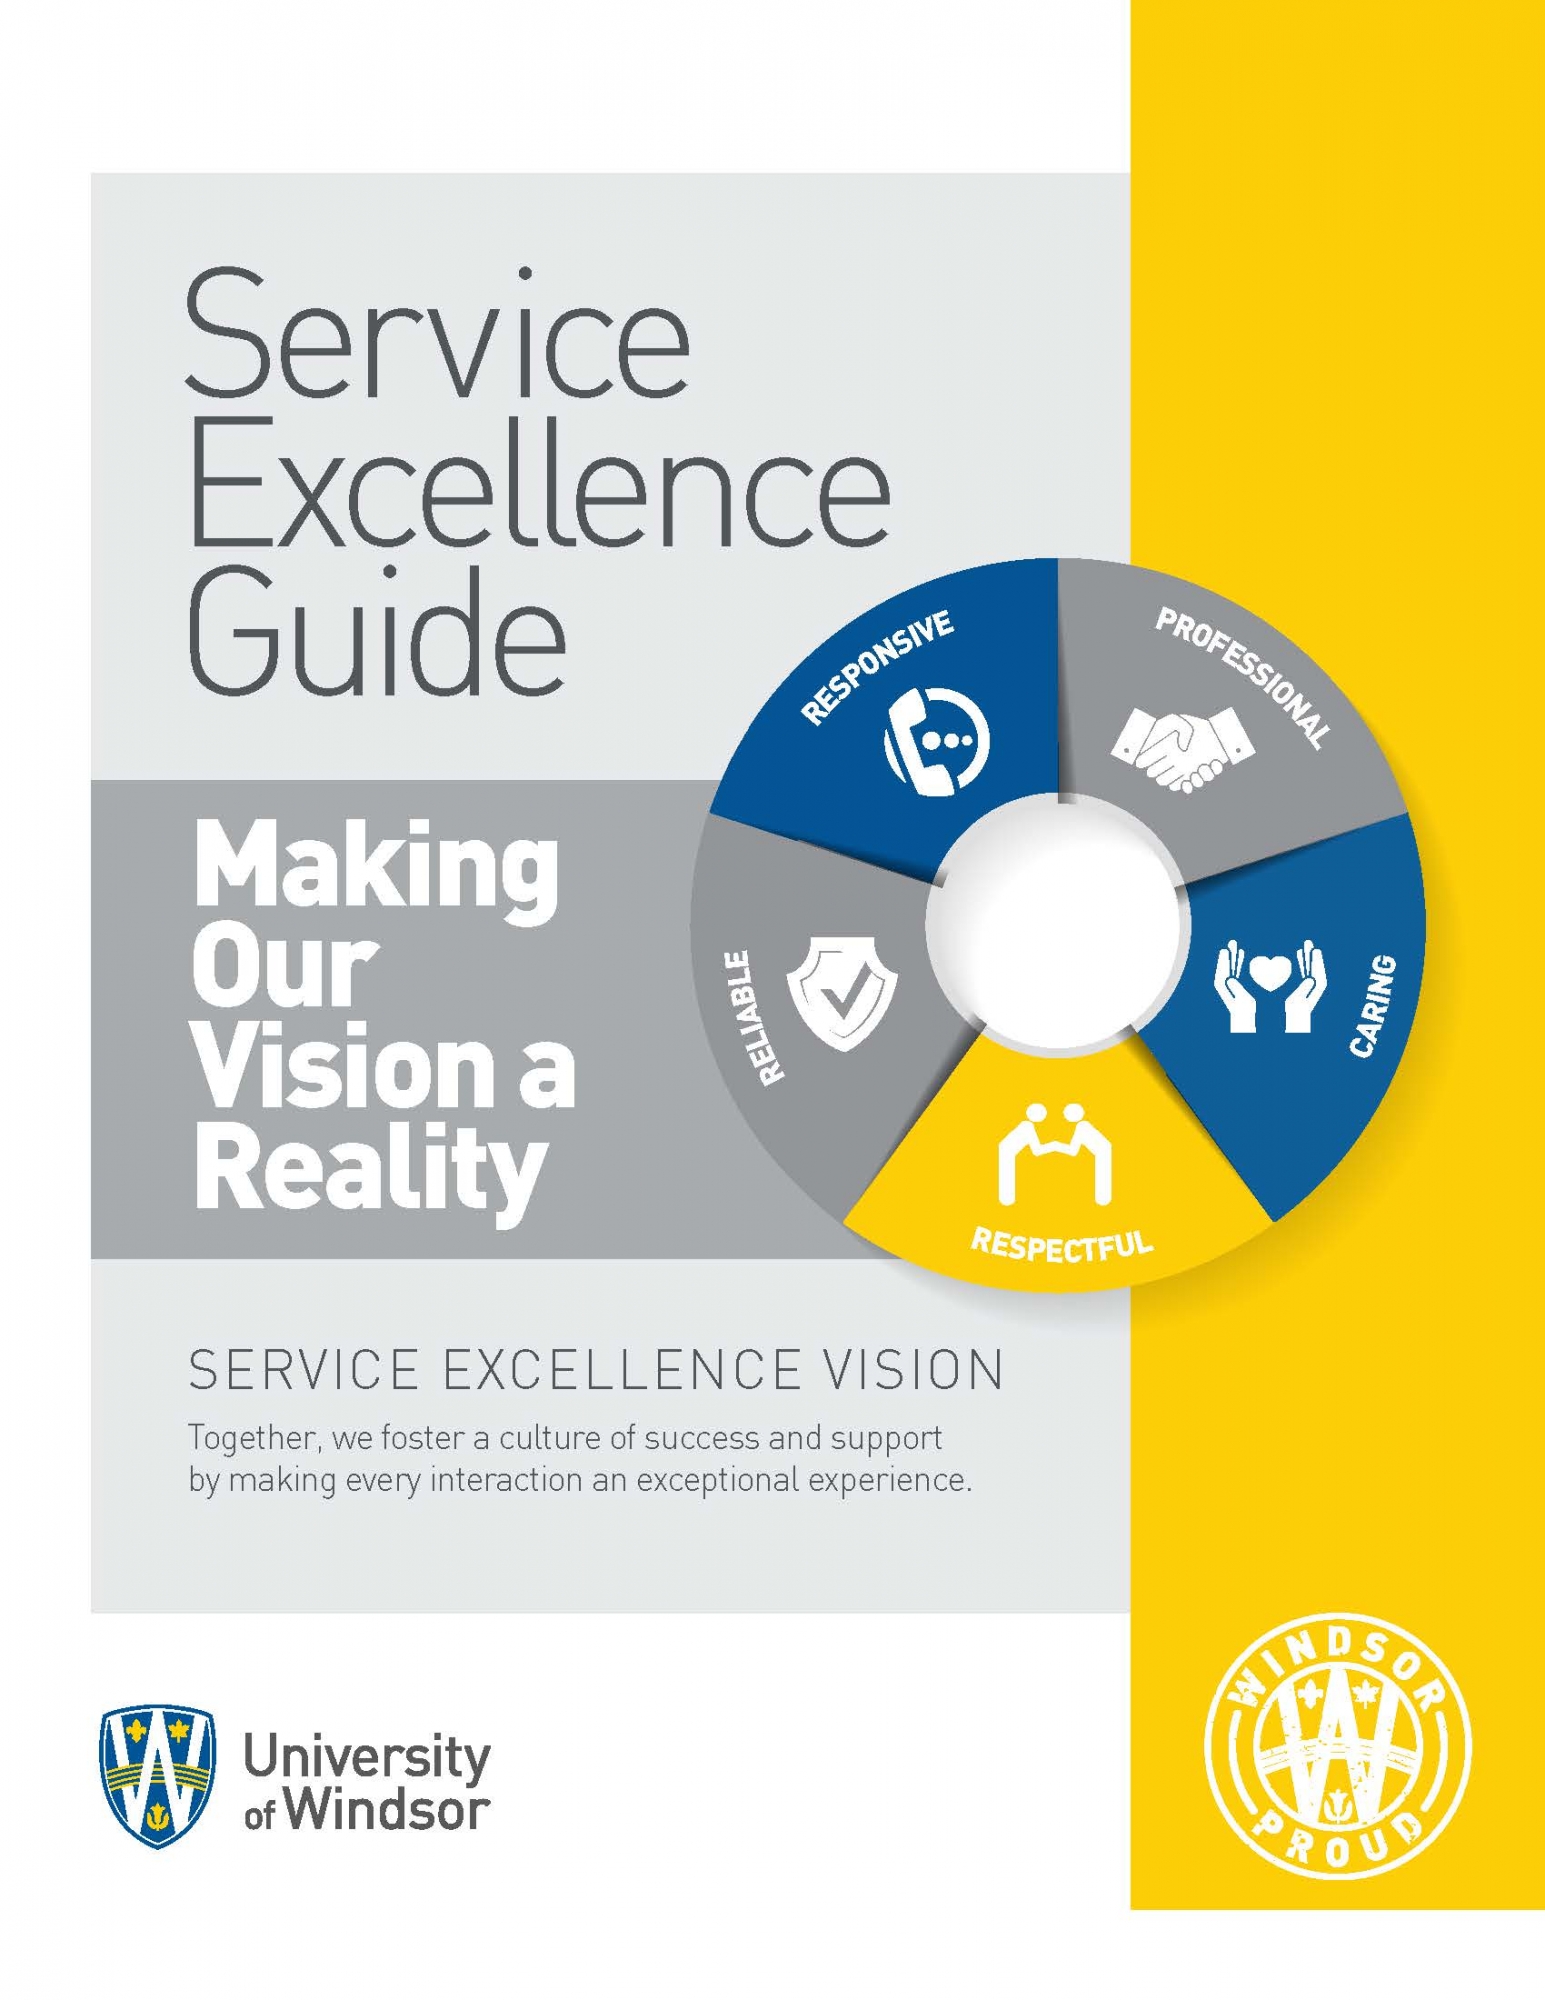 Service Excellence Guide